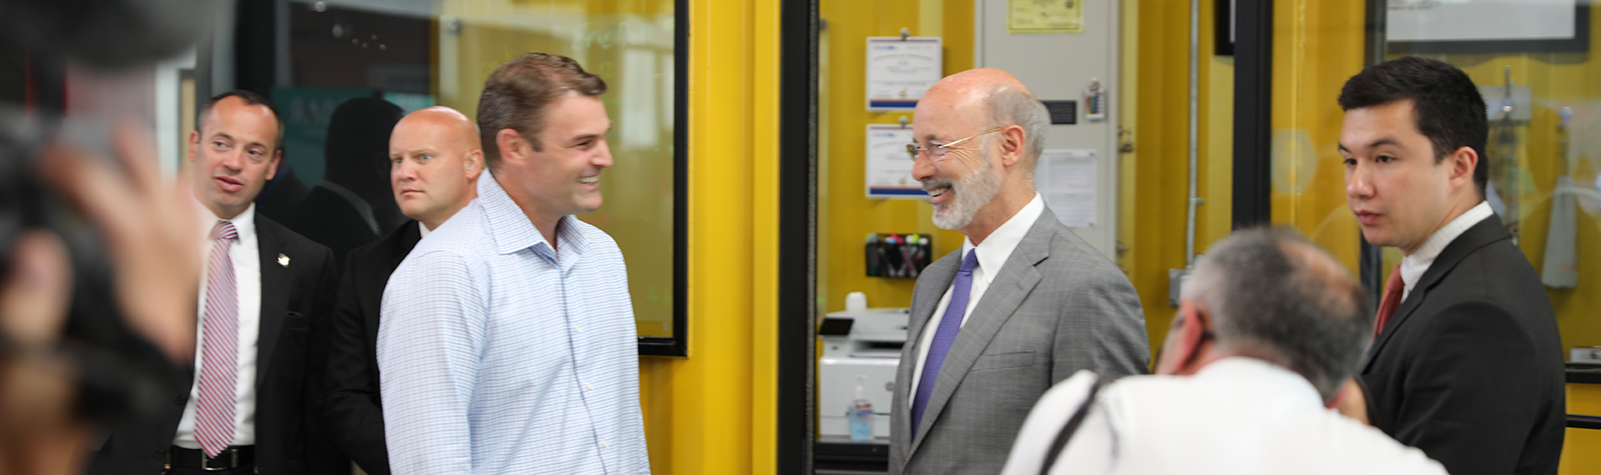 Gov. Tom Wolf Tours Factory, Promoting Investment in PA Start-ups